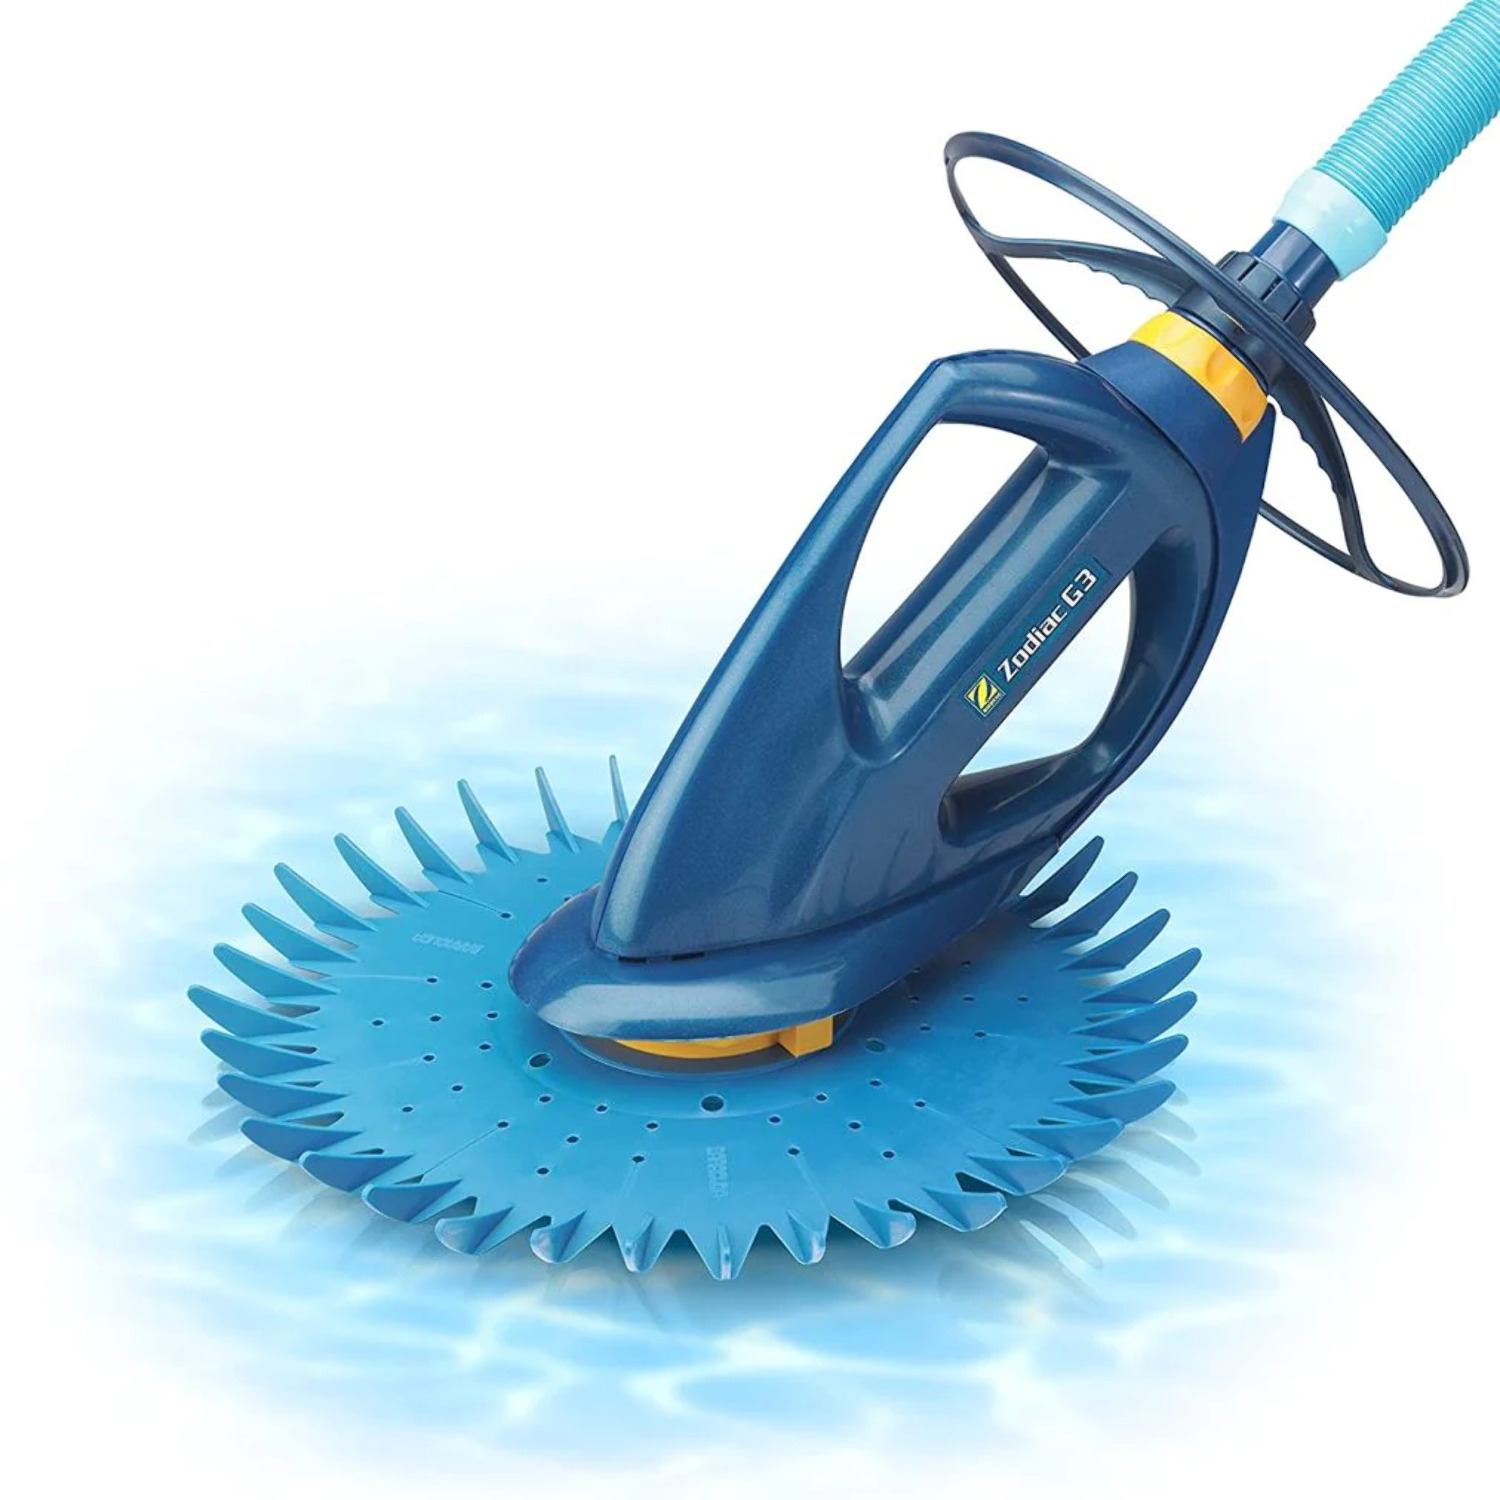 The Zodiac G3 Advanced Suction Side Automatic Pool Cleaner W03000 - image 1 of 3